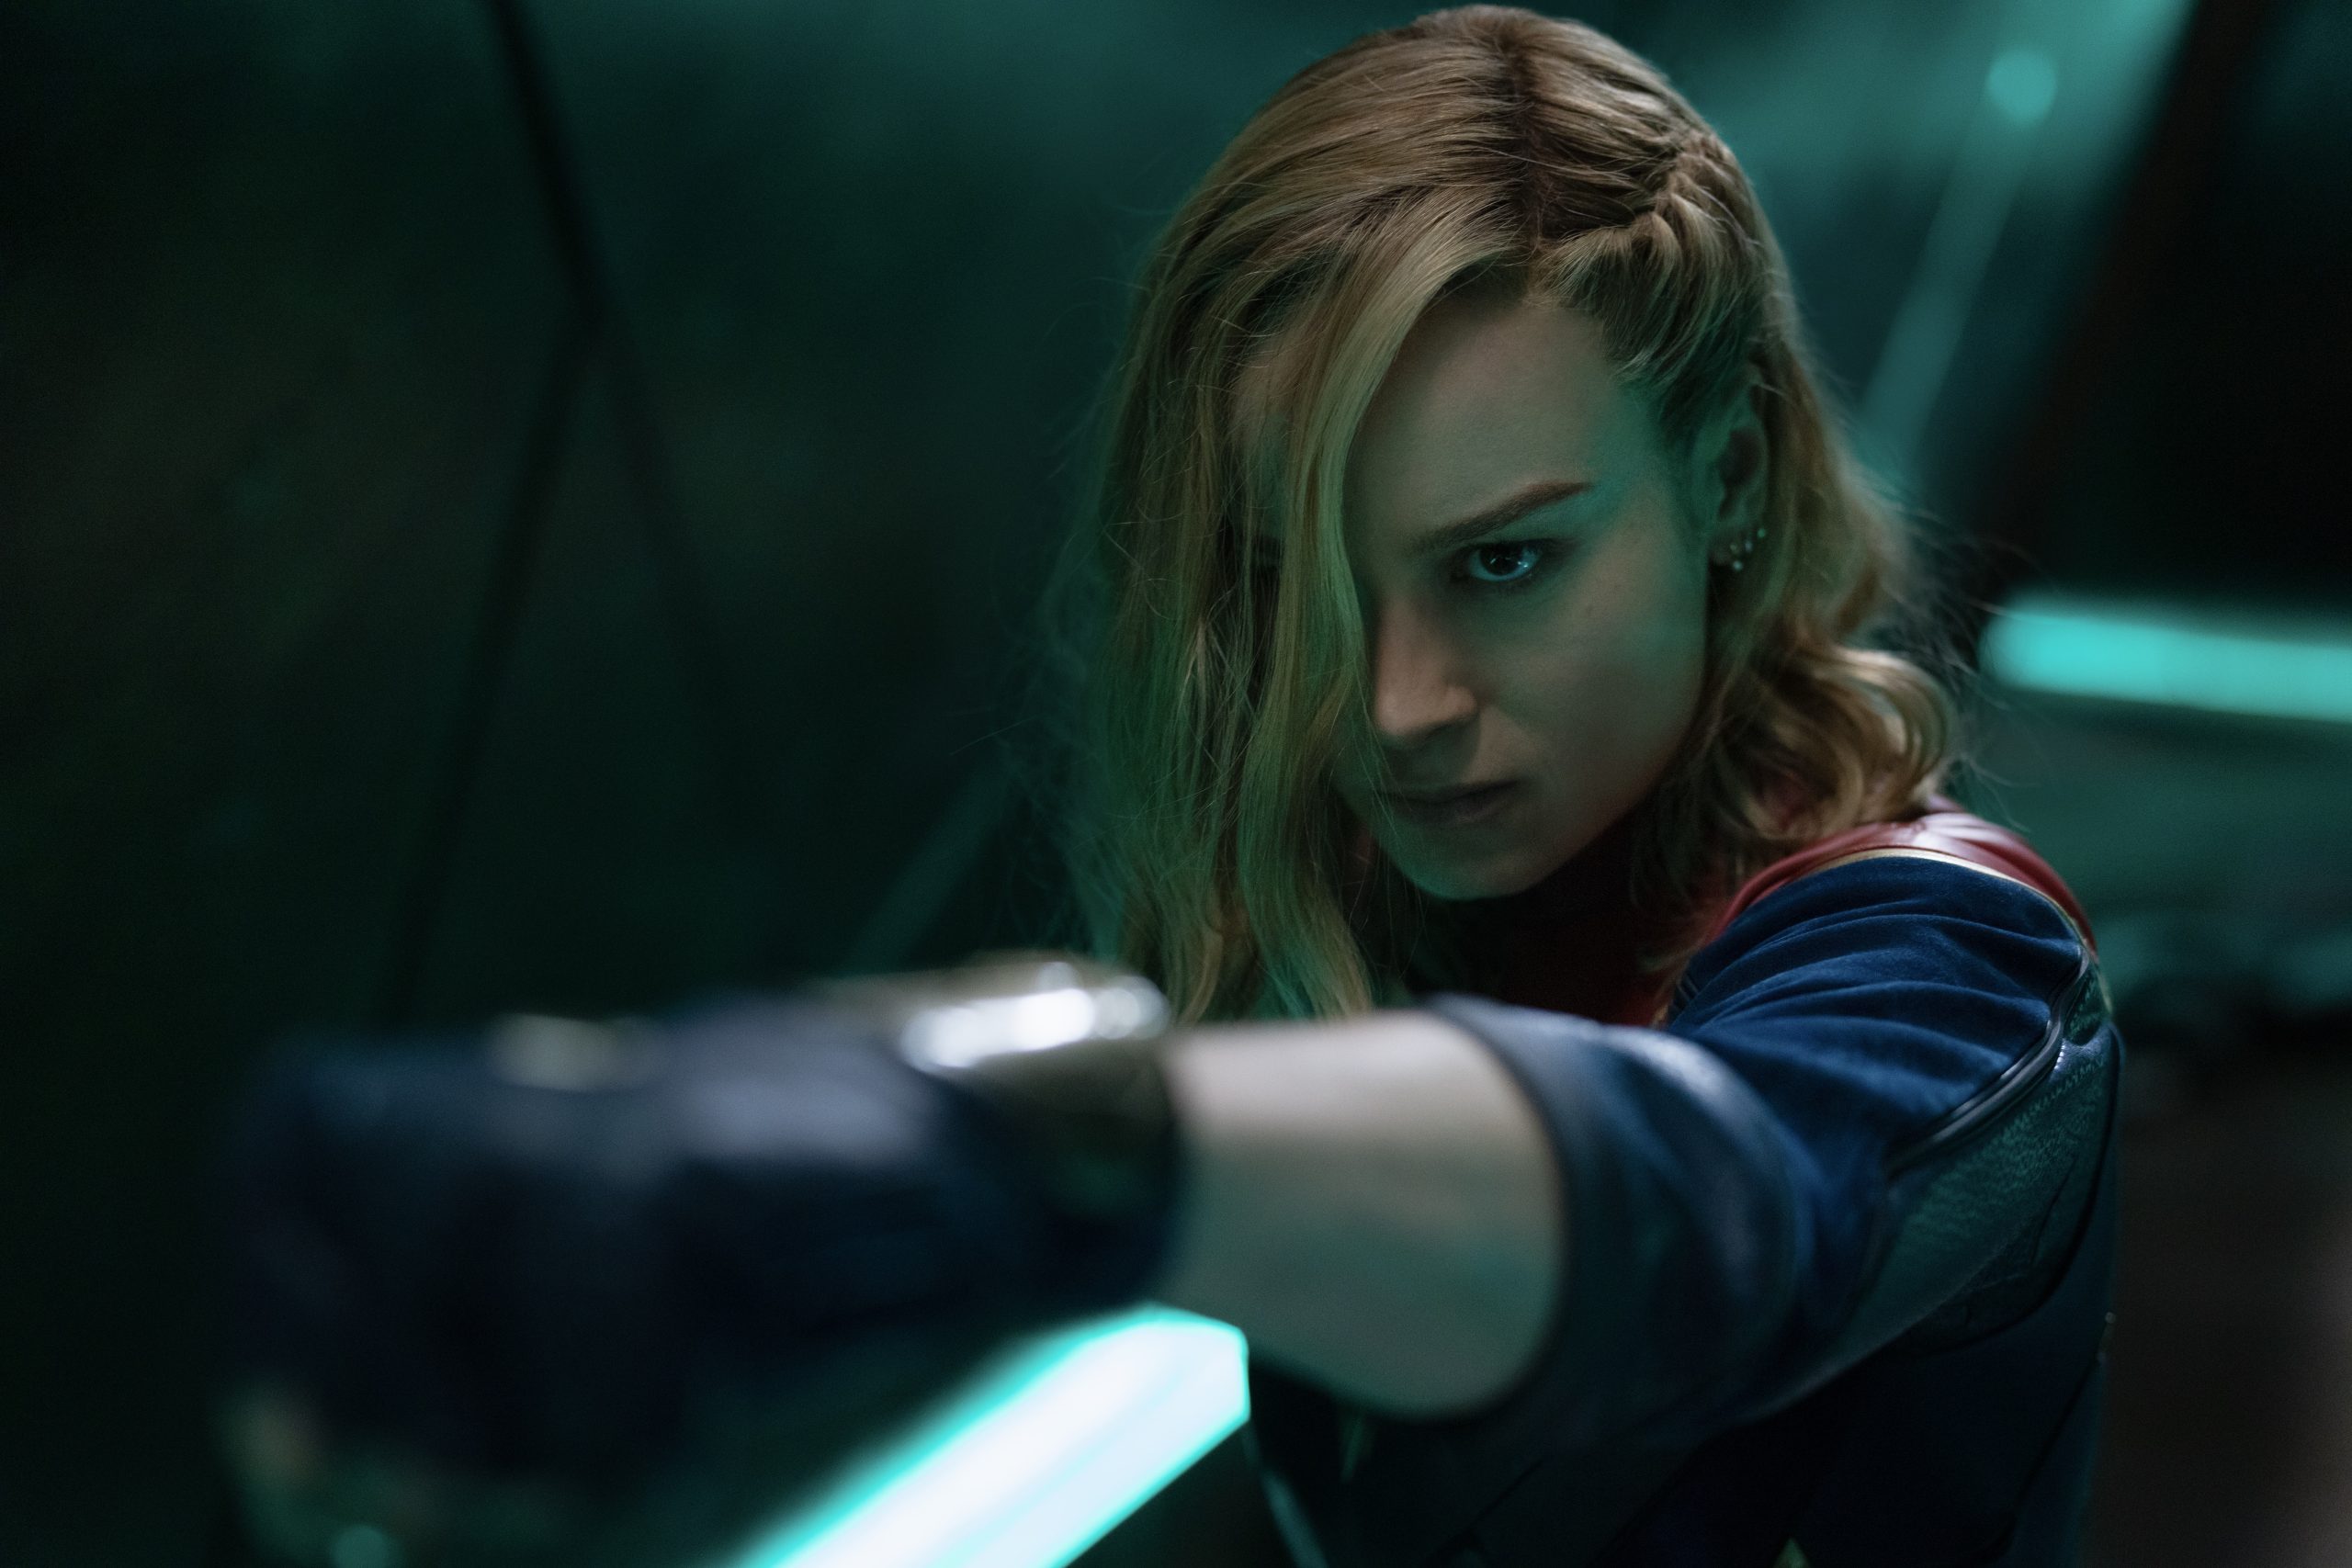 Brie Larson as Captain Marvel in The Marvels